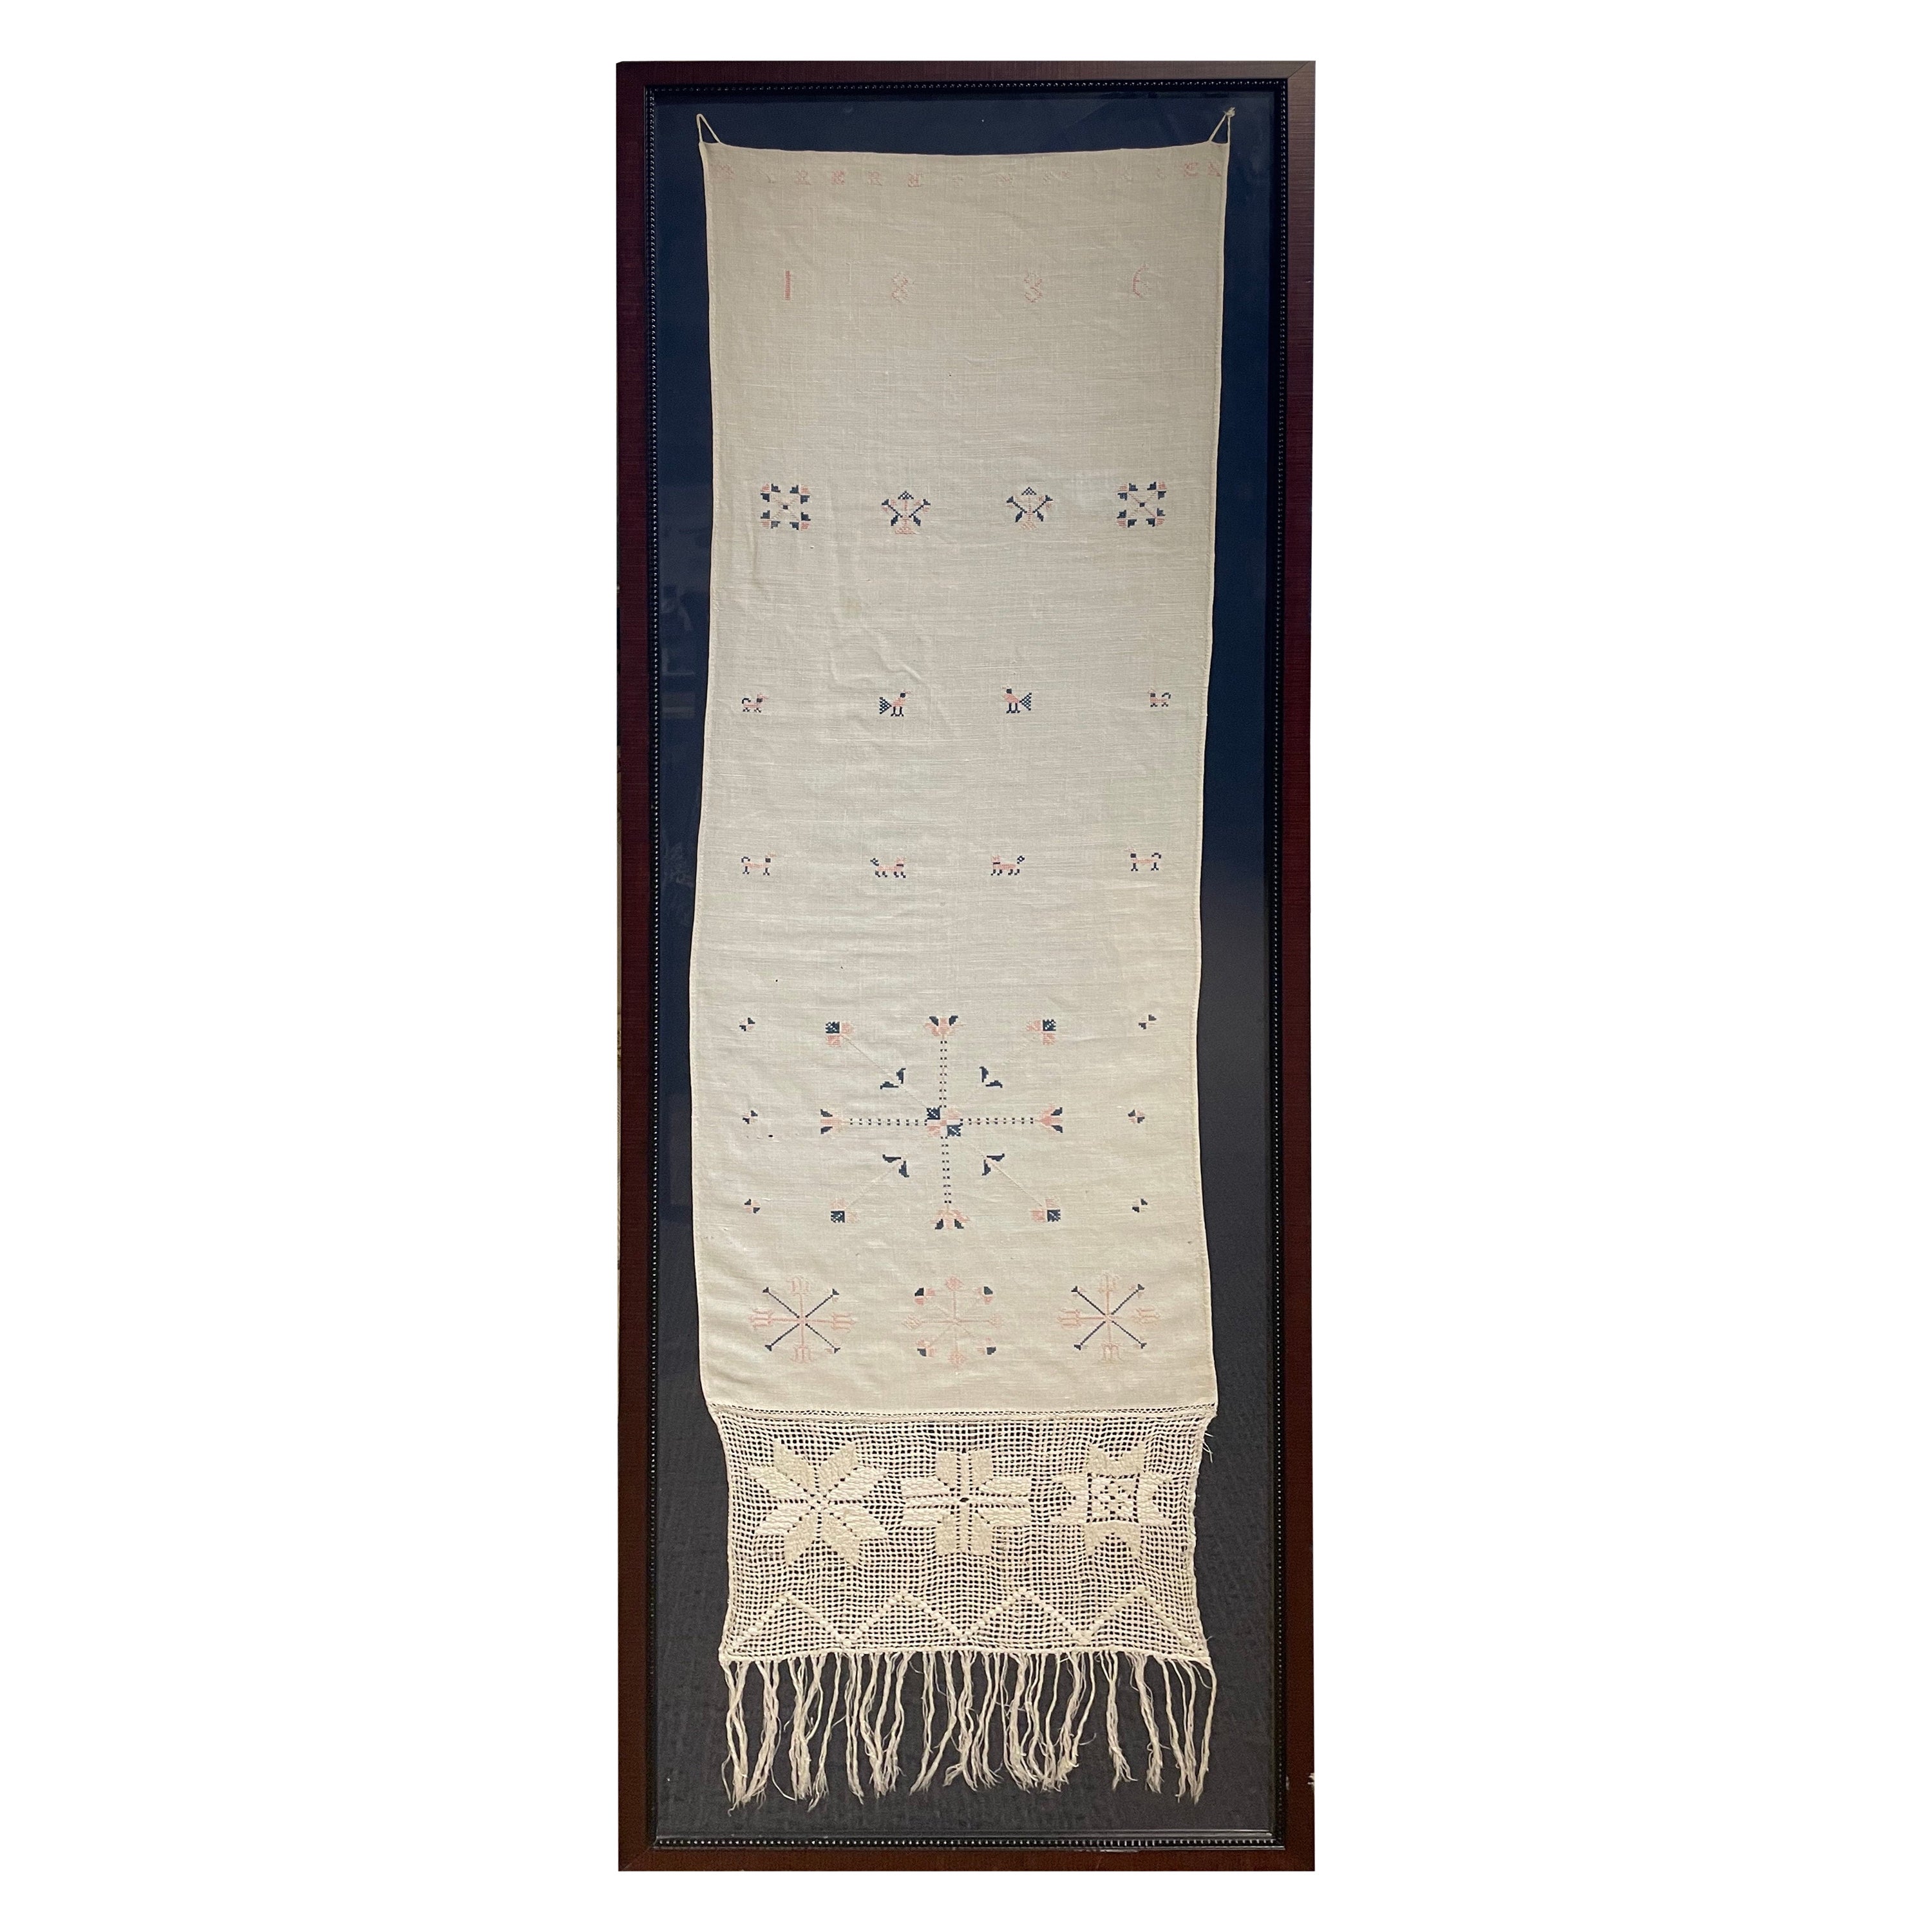 Early 19th Century Needlework "Show Towel" Dated 1836